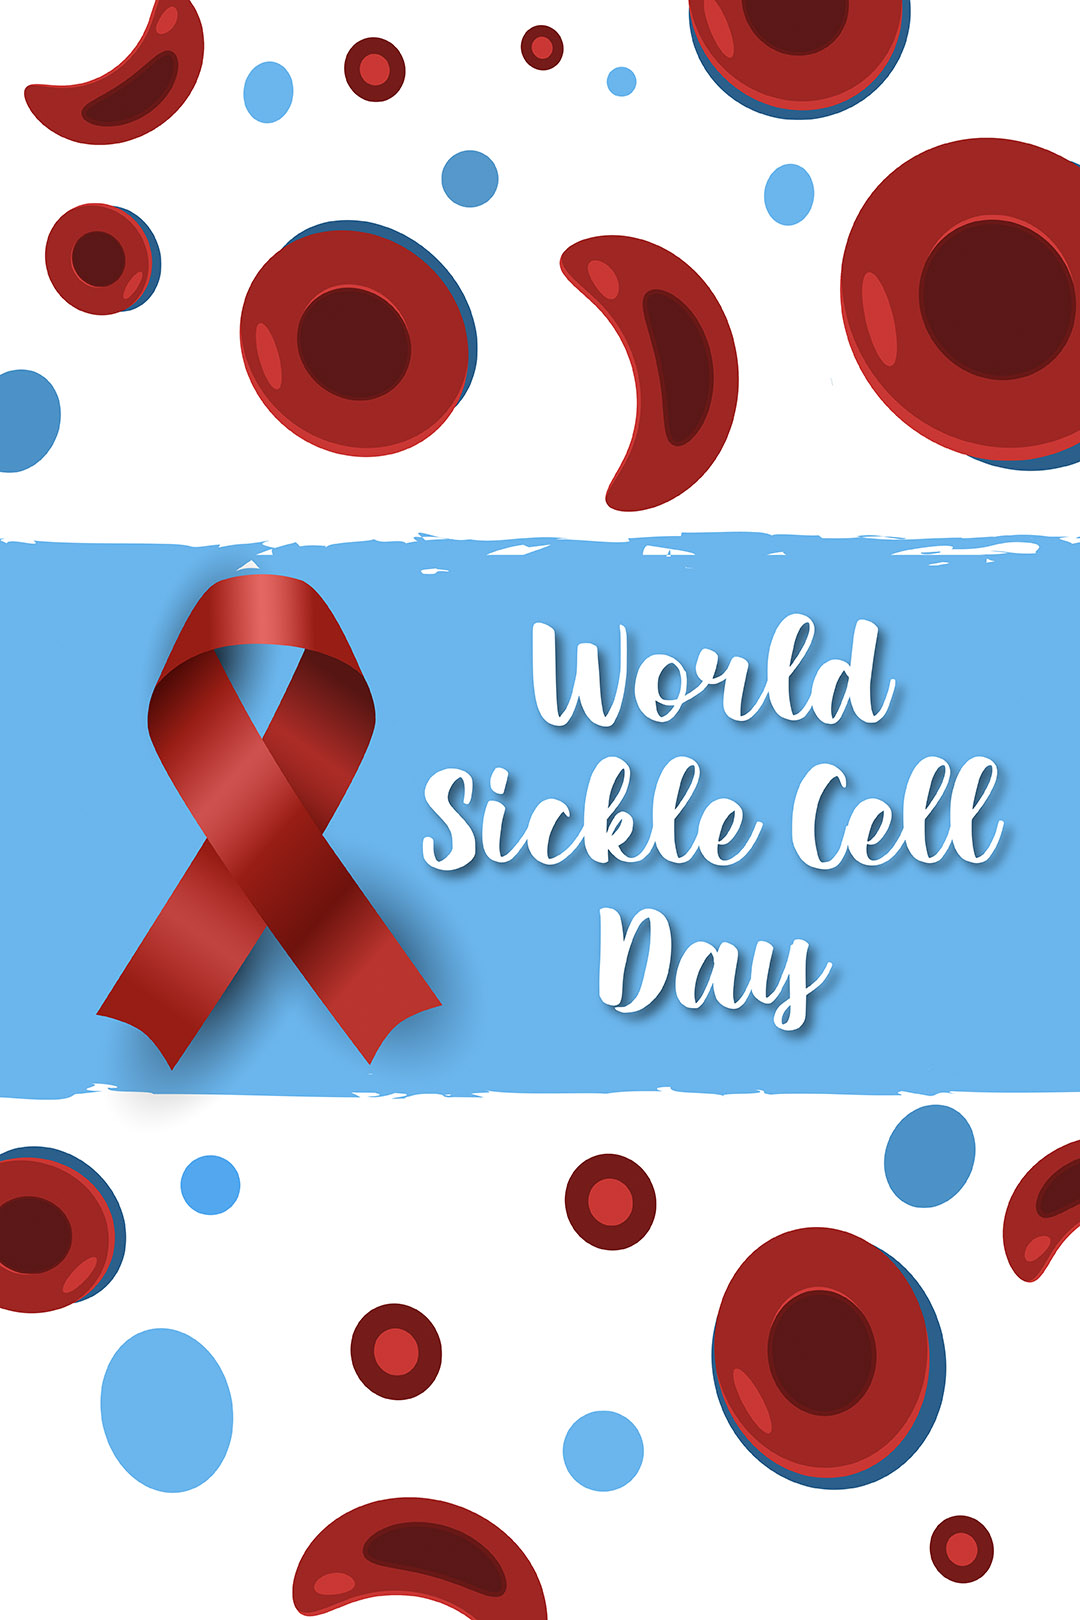 Recognizing Sickle Cell Day Raising Awareness and Supporting Those